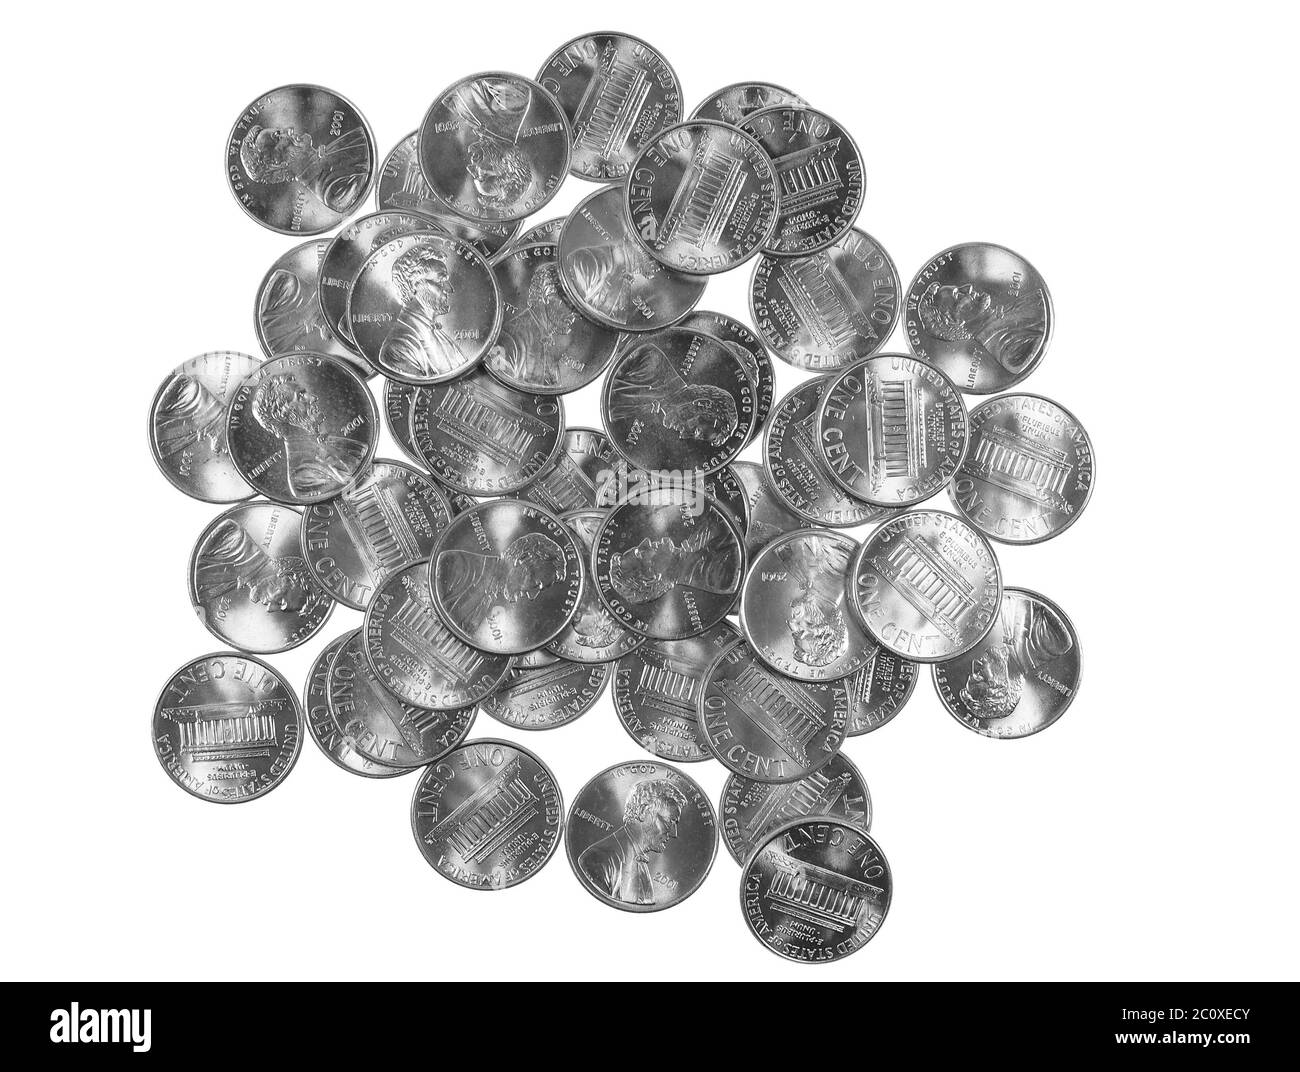 Black and white Dollar coins 1 cent wheat penny Stock Photo